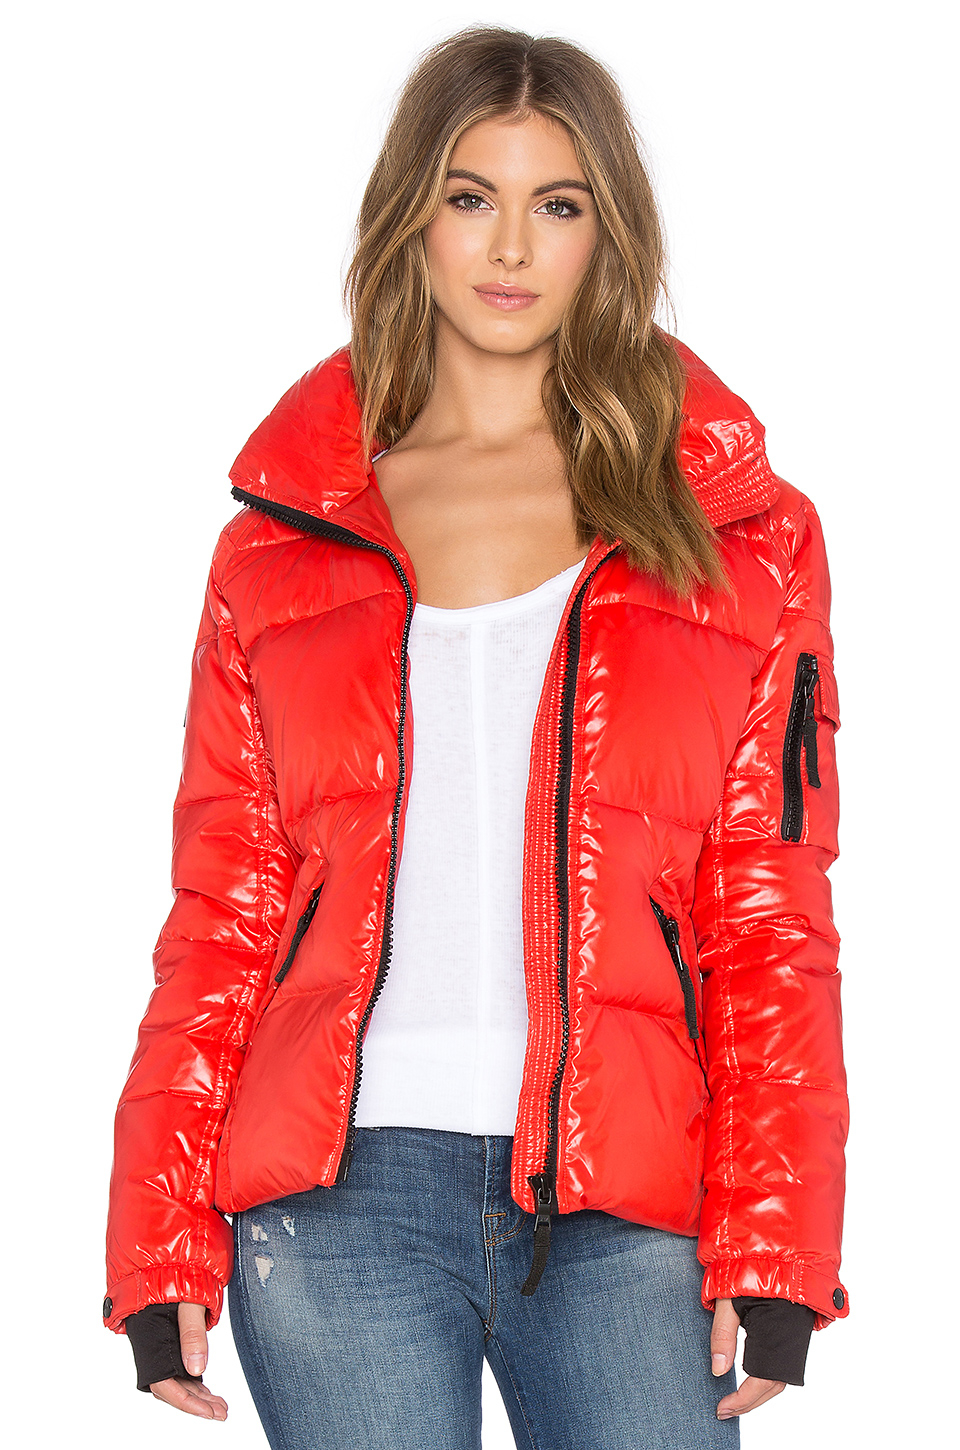 Lyst - Sam. Freestyle Quilted Jacket in Red